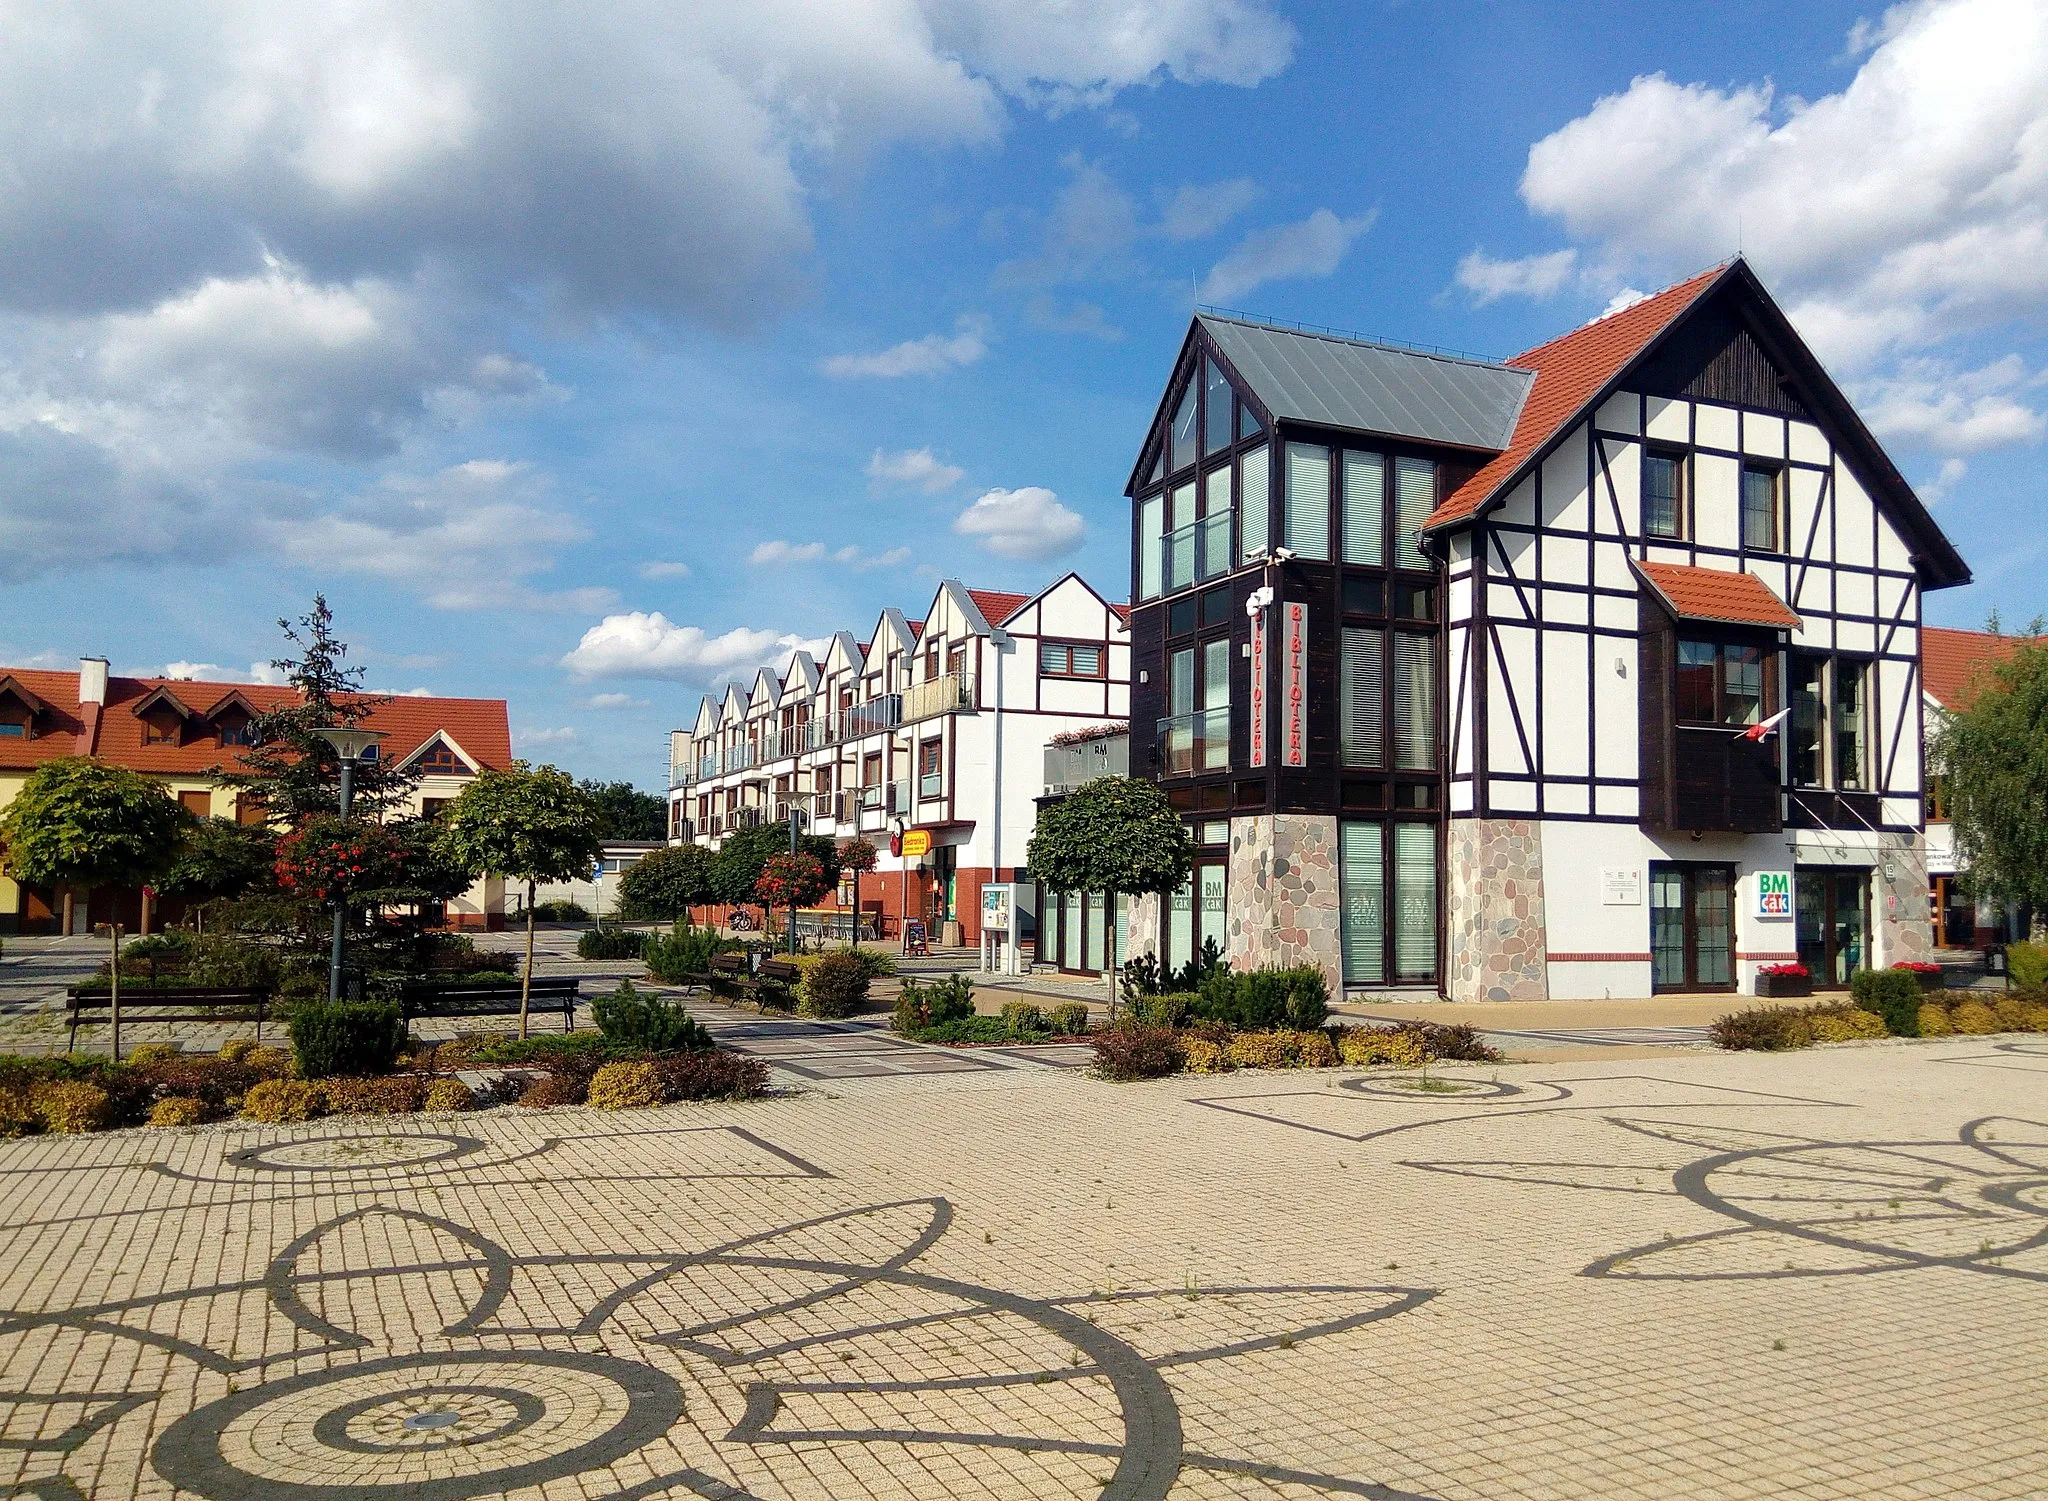 Photo showing: Market Square in Puszczykowo near Poznan, western Poland, with the historicist architecture from the years 2002-2012.